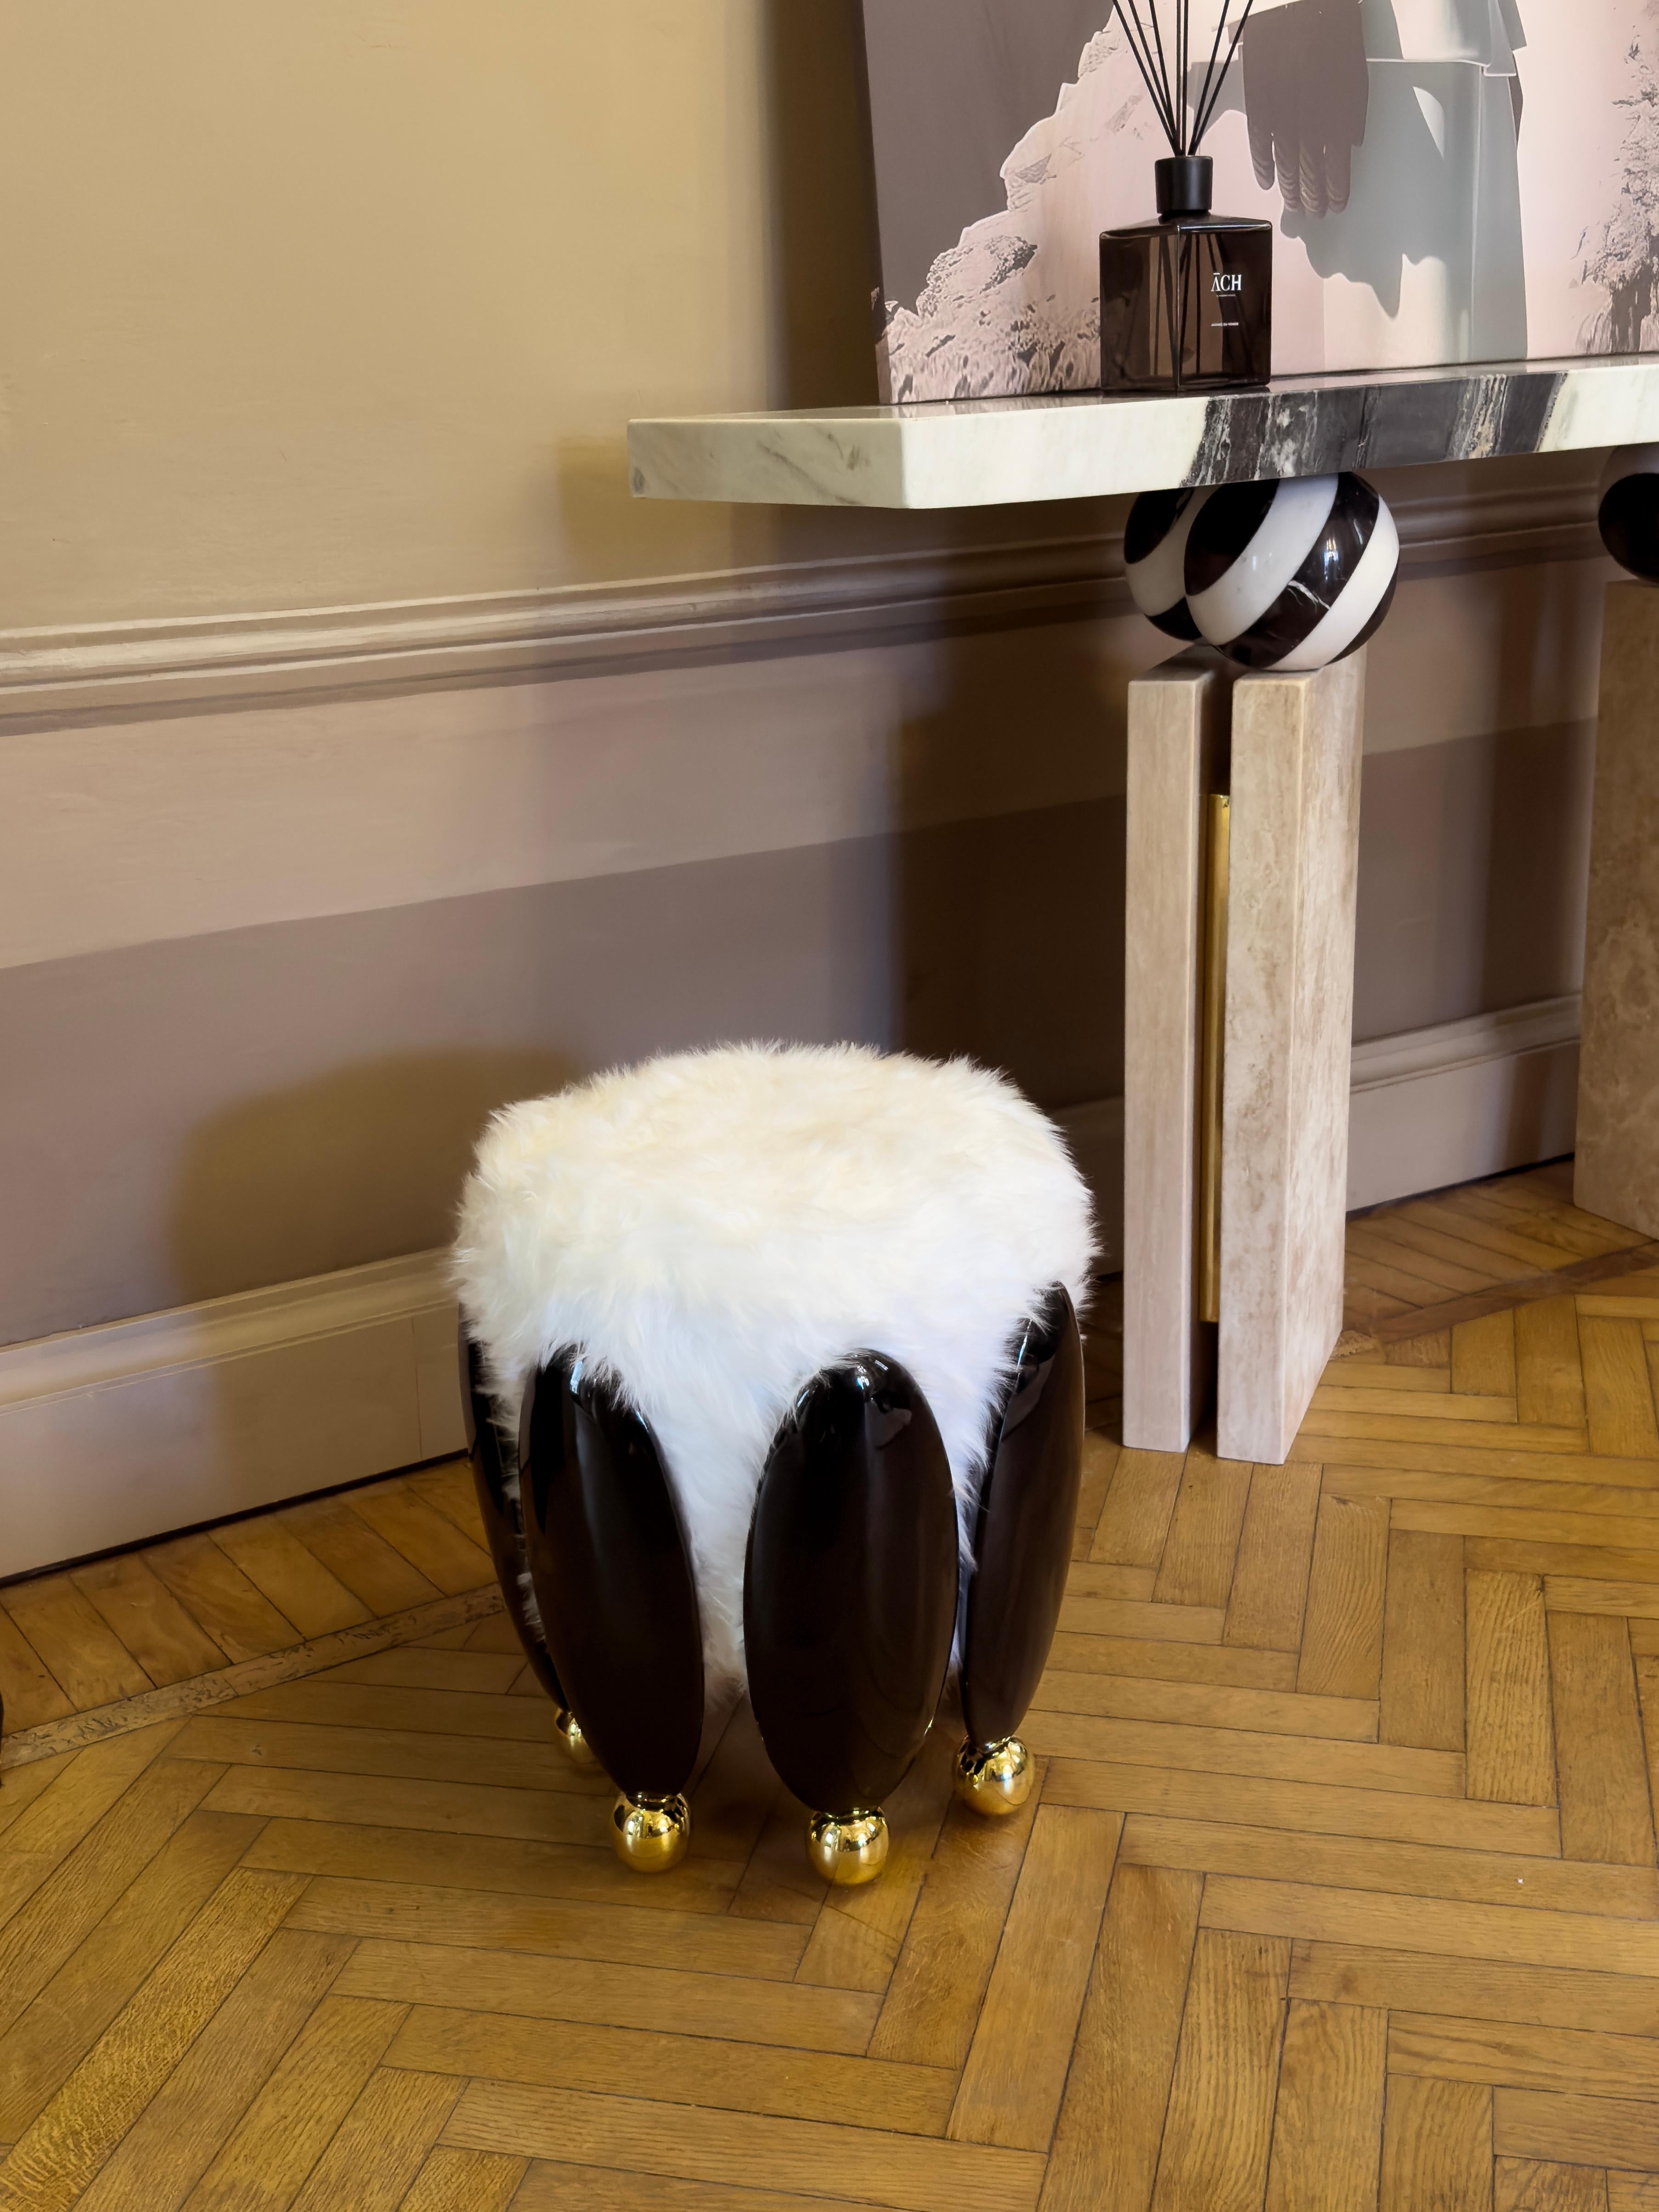 Portuguese Contemporary Black Stool Upholstered with Fur Top & Gold Spheres Details For Sale